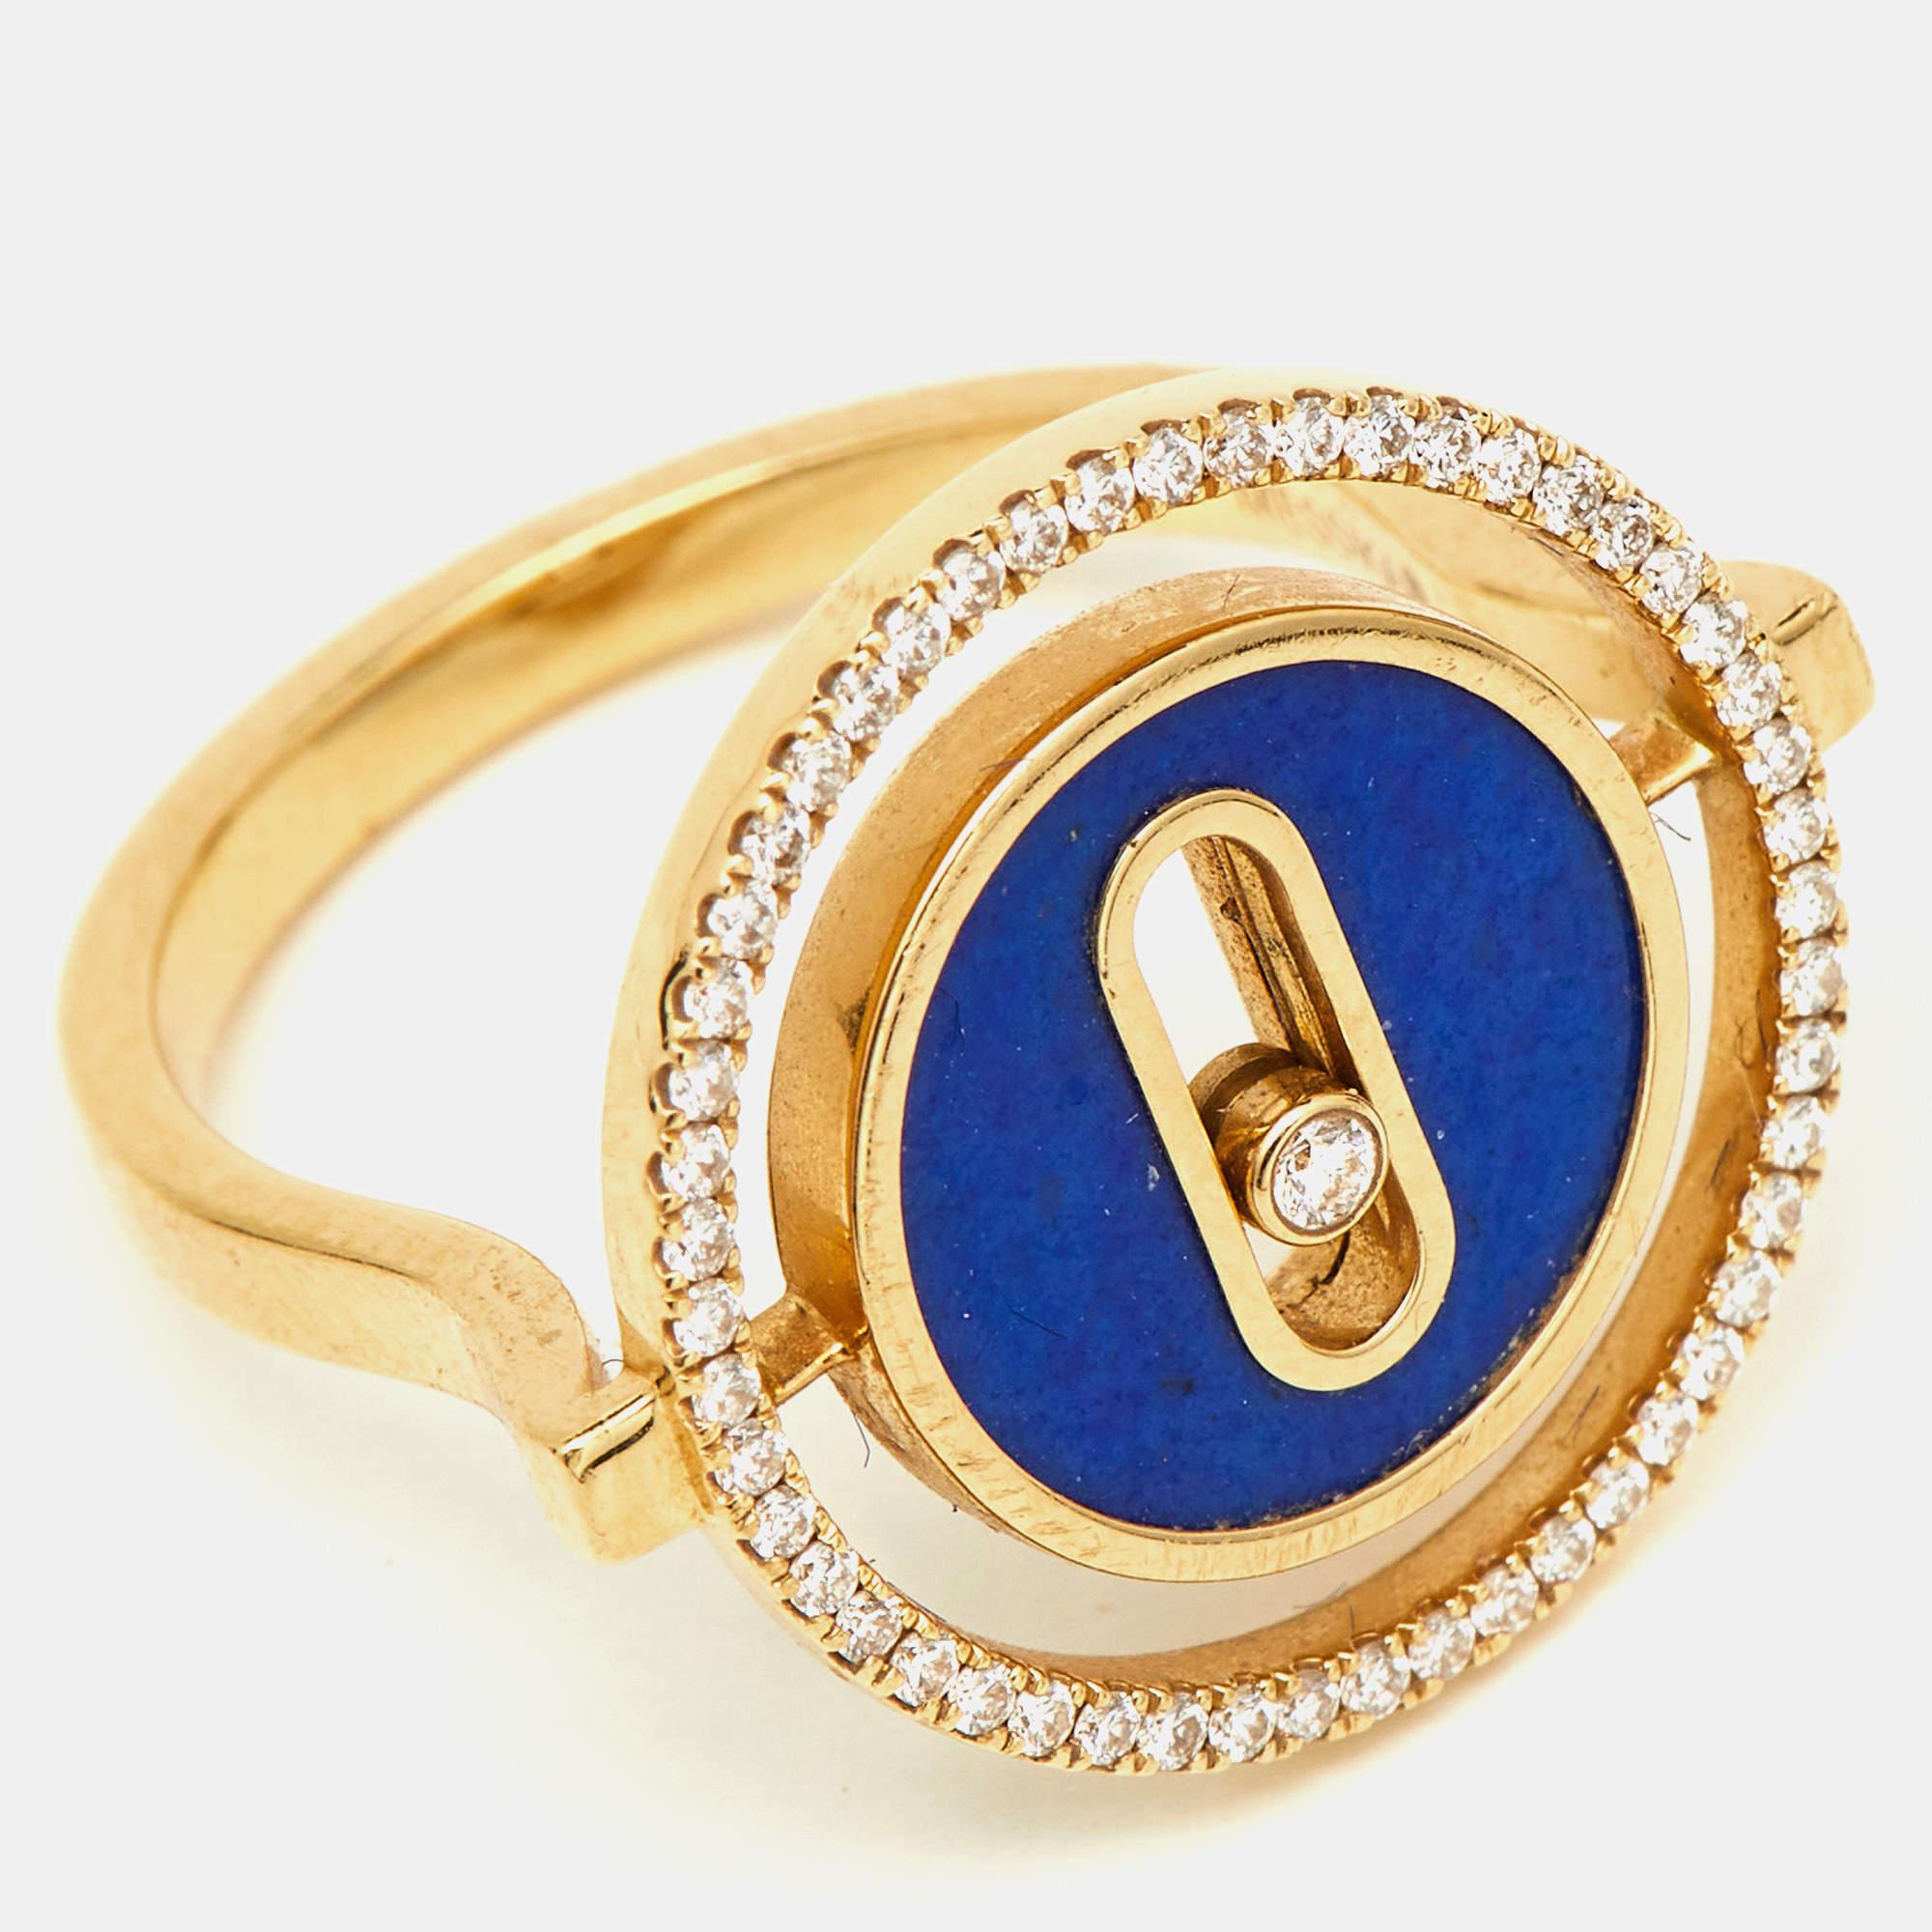 Uncut Messika Lucky Move Lapis Lazuli Diamond 18k Yellow Gold SM Ring Size 50 For Sale